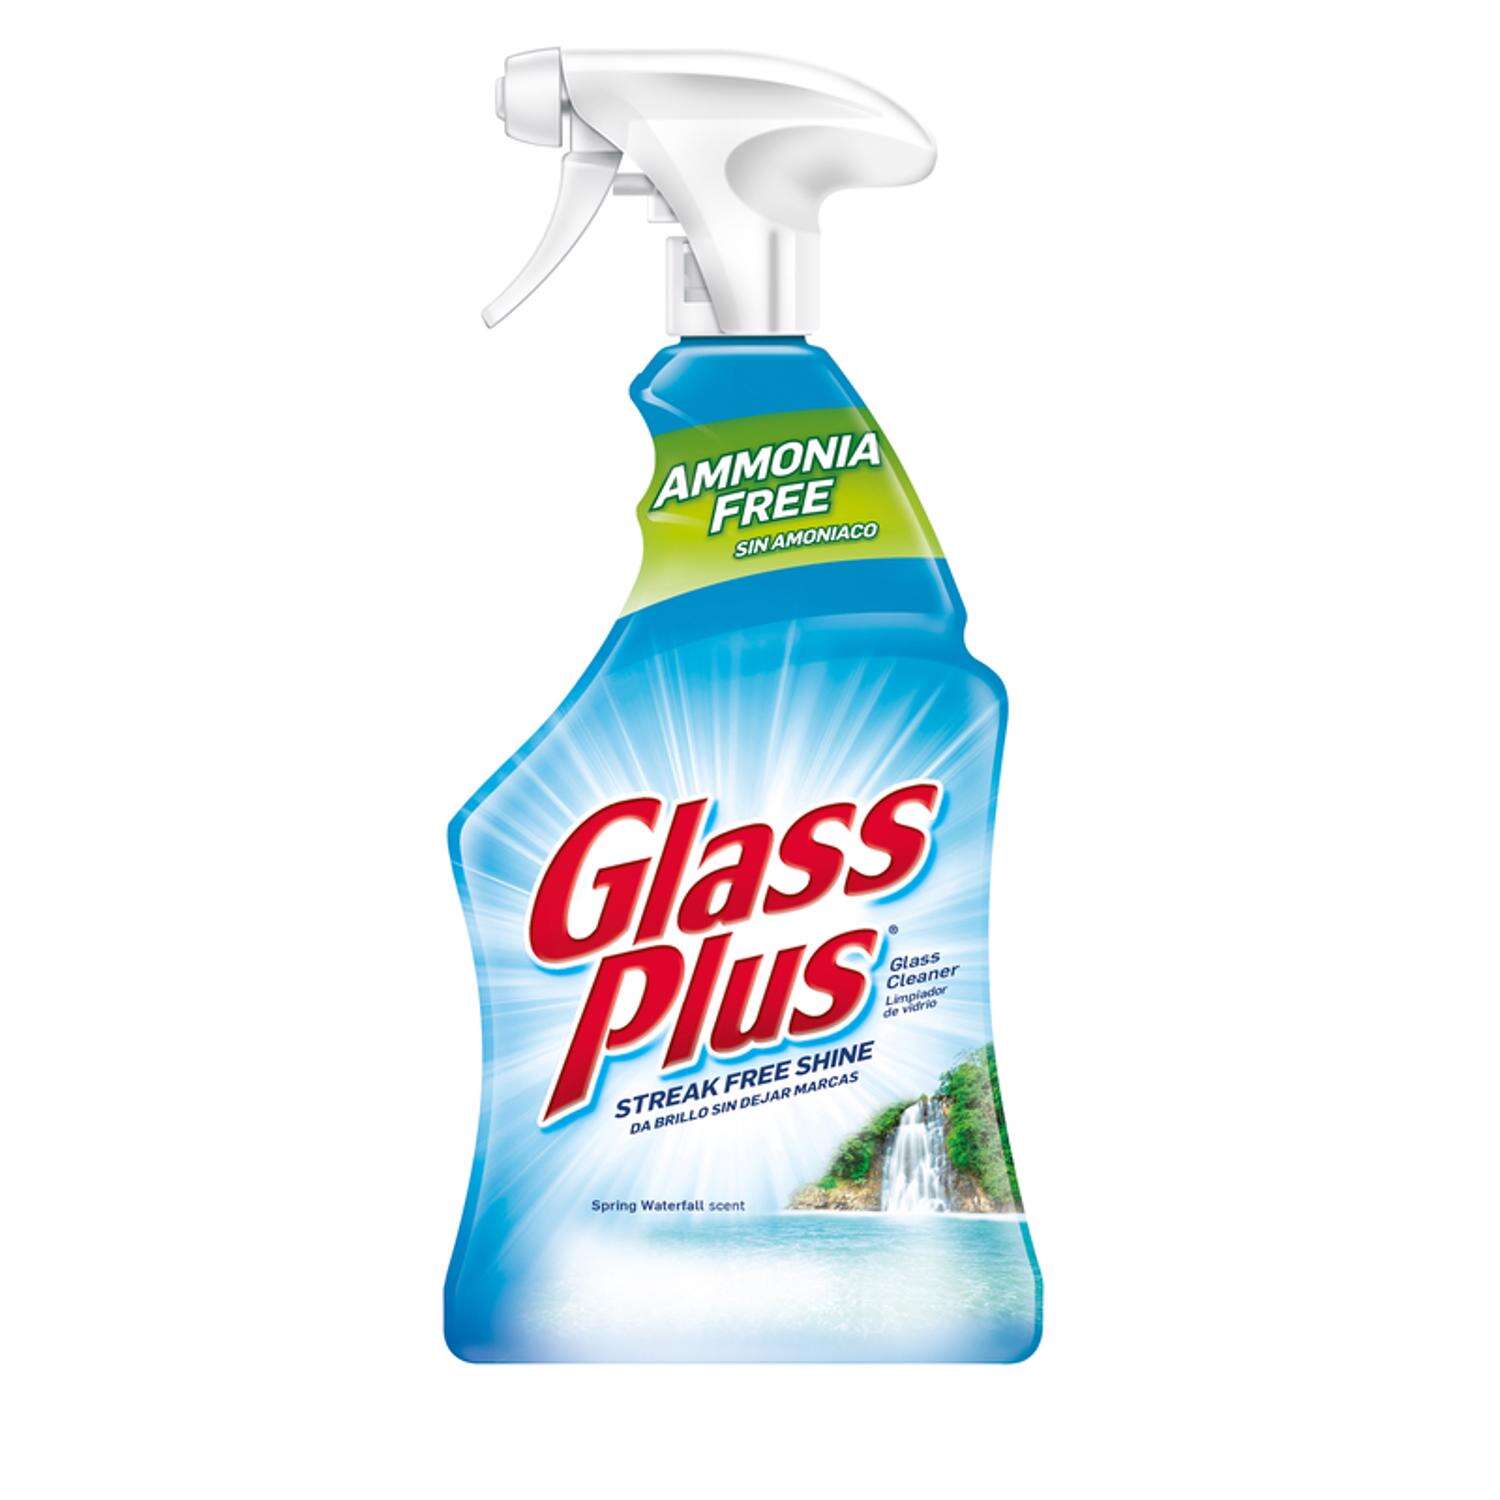 Purchase Maddox Detail - Glass Cleaner online at BrandedStocklots.com ✓  Discover more from the same seller or category ✓ Over 10,000 products ✓  Hassle-free transactions